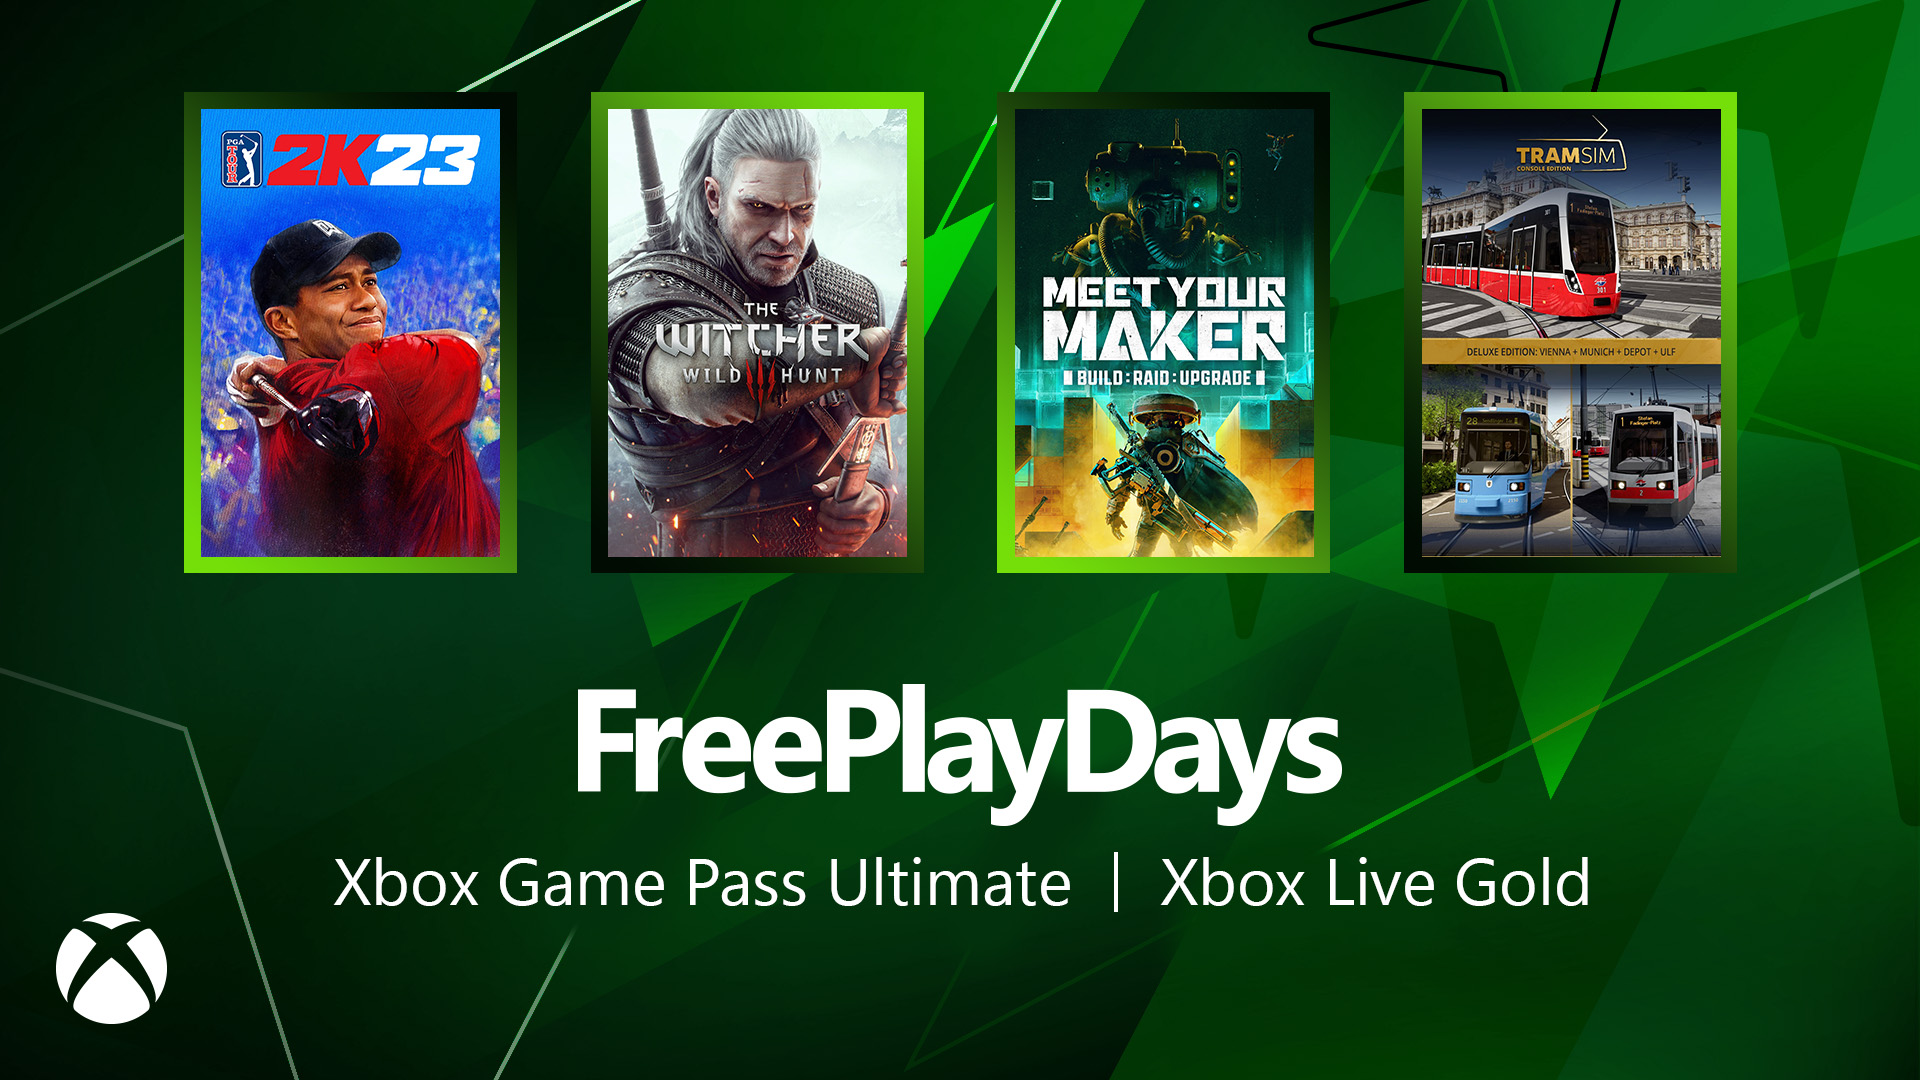 Free Play Days – PGA Tour 2K23, The Witcher 3: Wild Hunt, Meet Your Maker, and TramSim